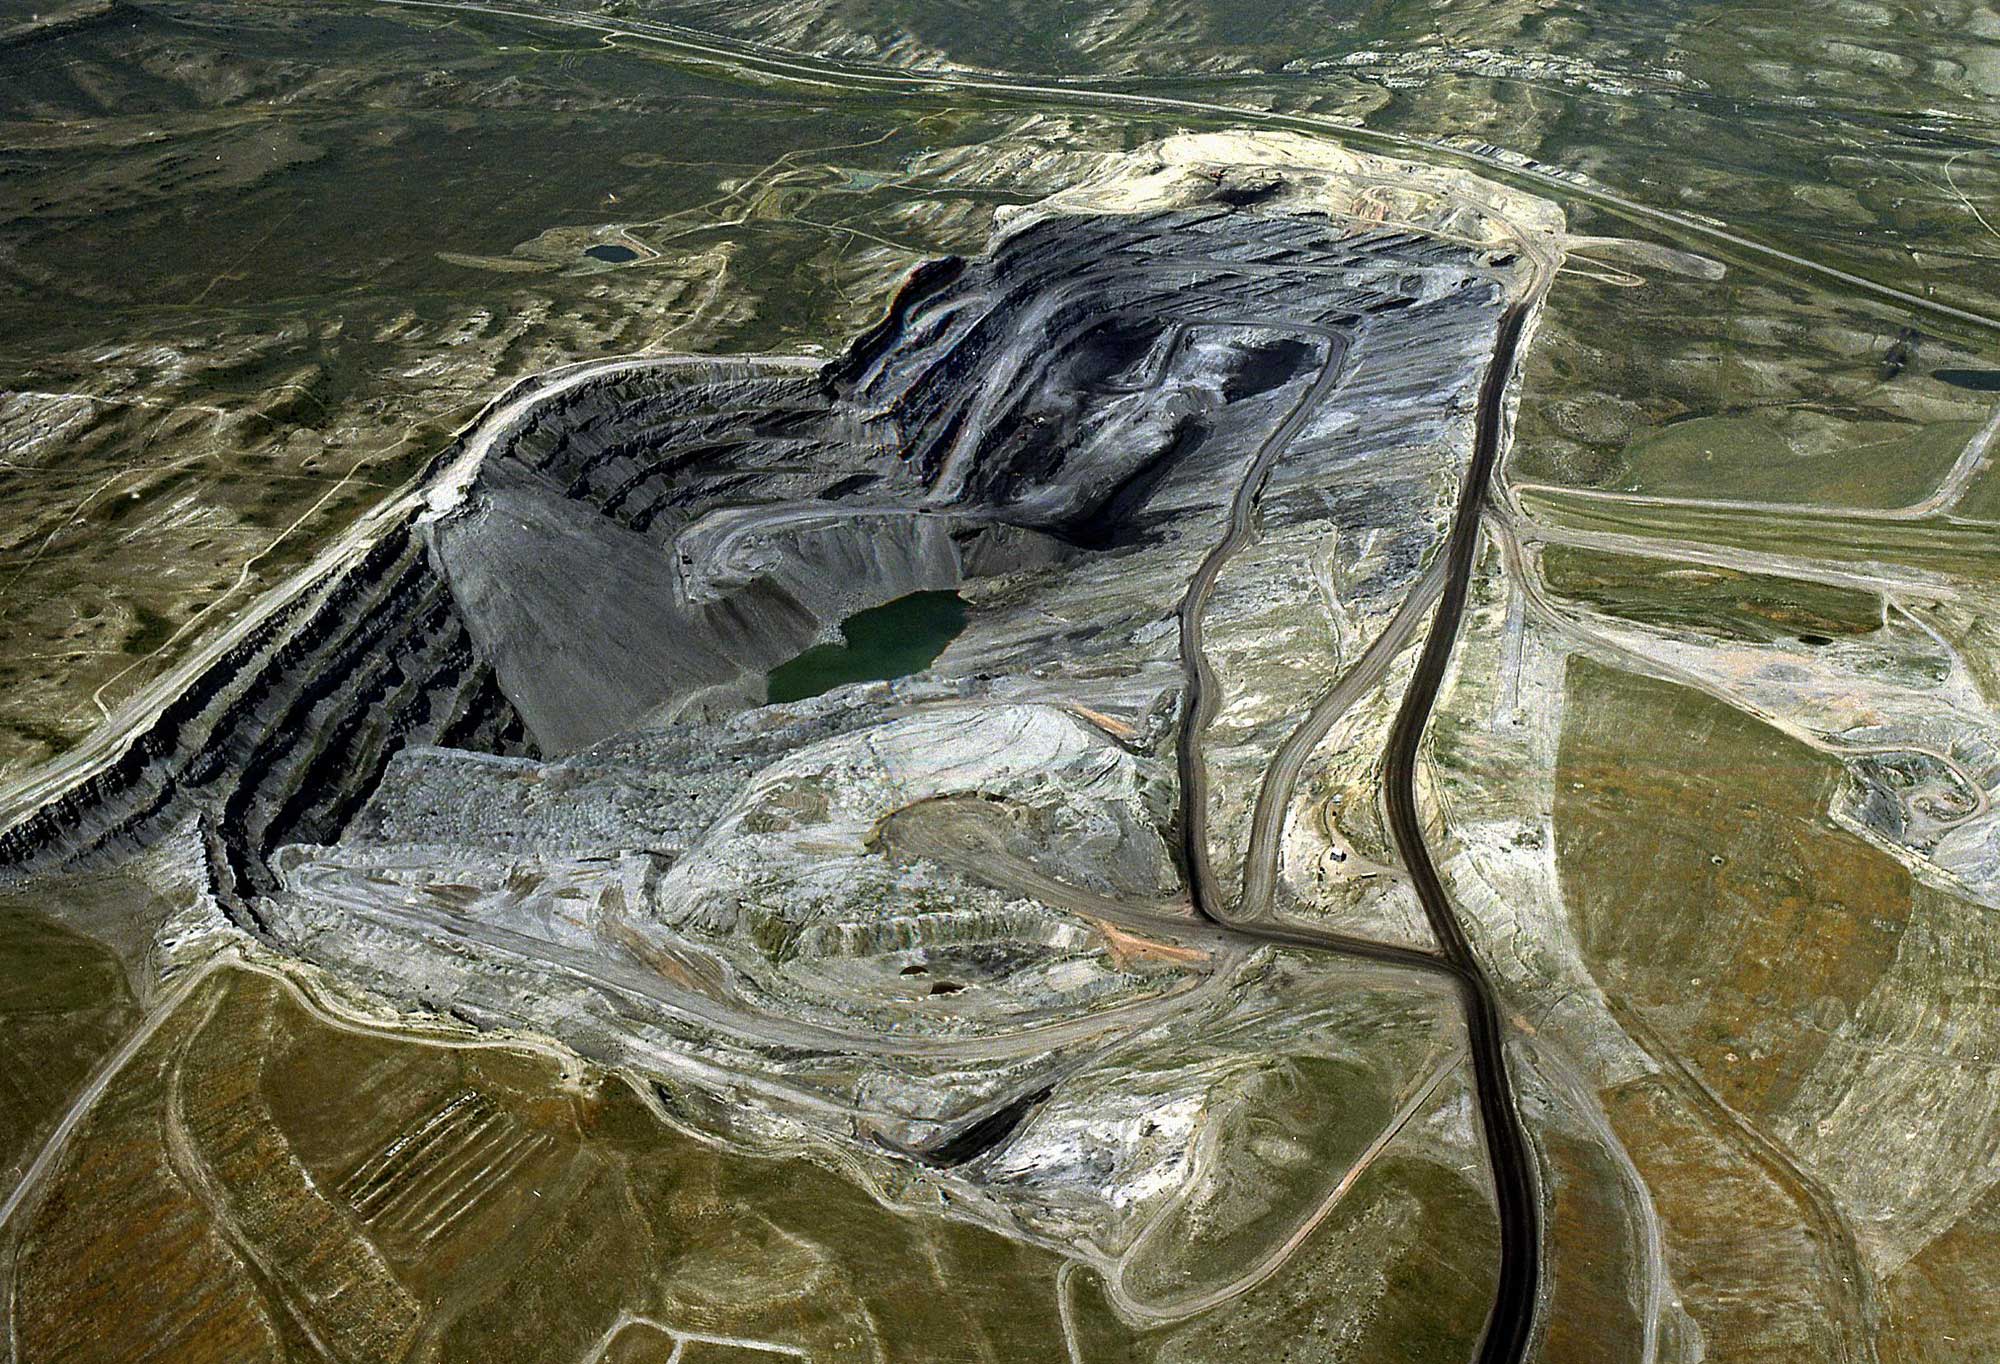 Aerial photograph of an open-pit coal mine in the Powder River Basin of Wyoming. The photo shows a large pit with roads along its rim and also running to it. One side of the pit has terraced (stair-step like) walls. Water has pooled in the deepest part of the pit. 